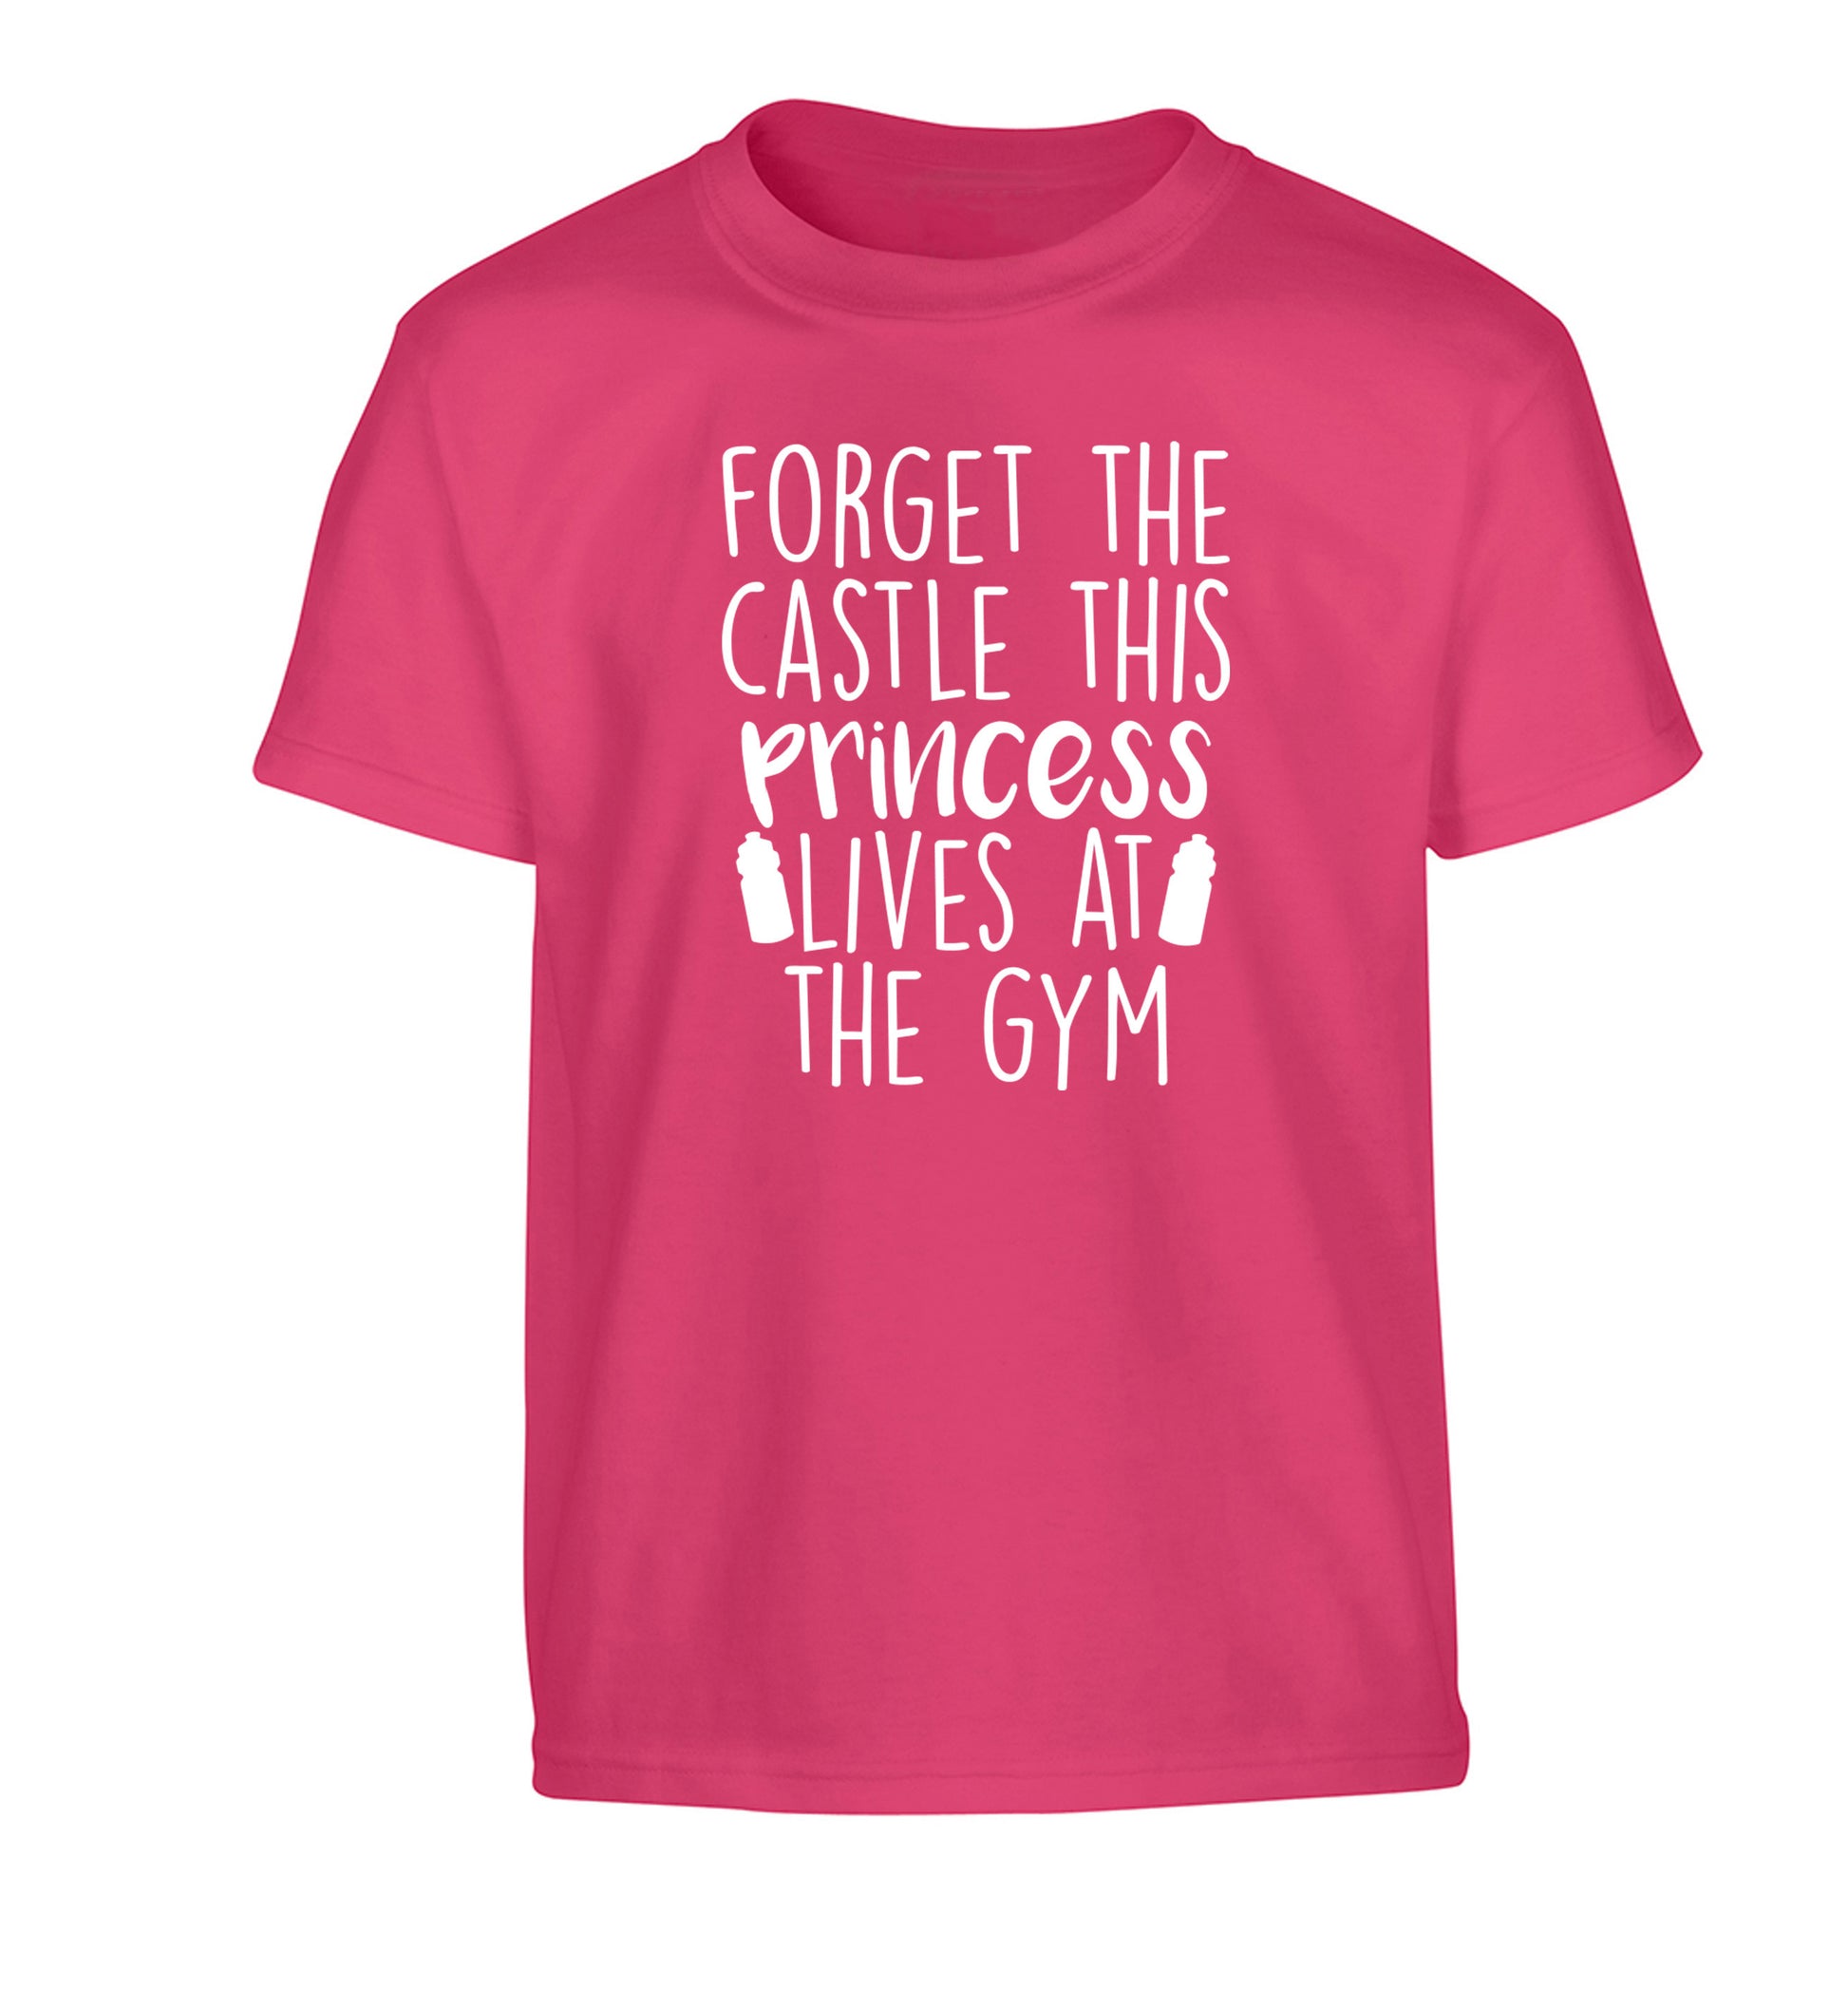 Forget the castle this princess lives at the gym Children's pink Tshirt 12-14 Years